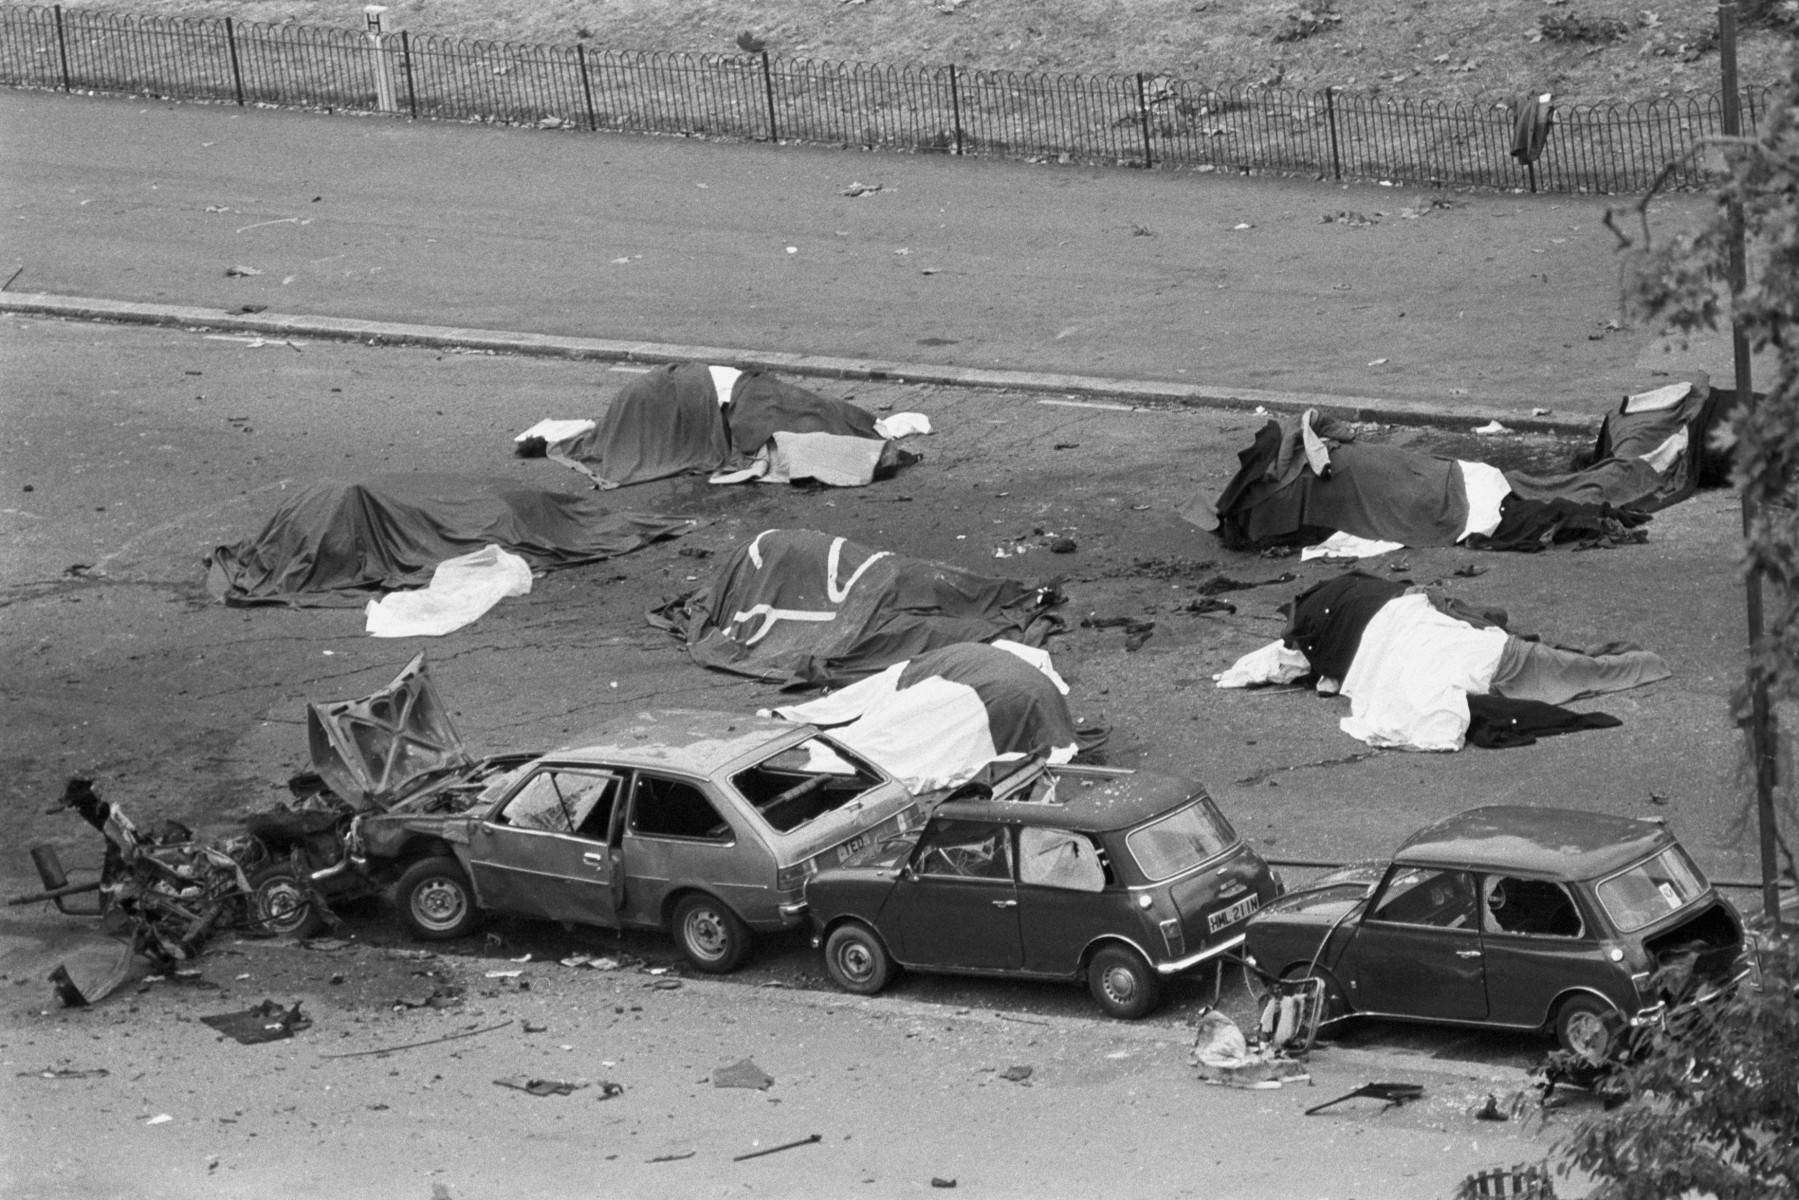 Four soldiers were killed in the IRA's bombing at Hyde Park in 1982